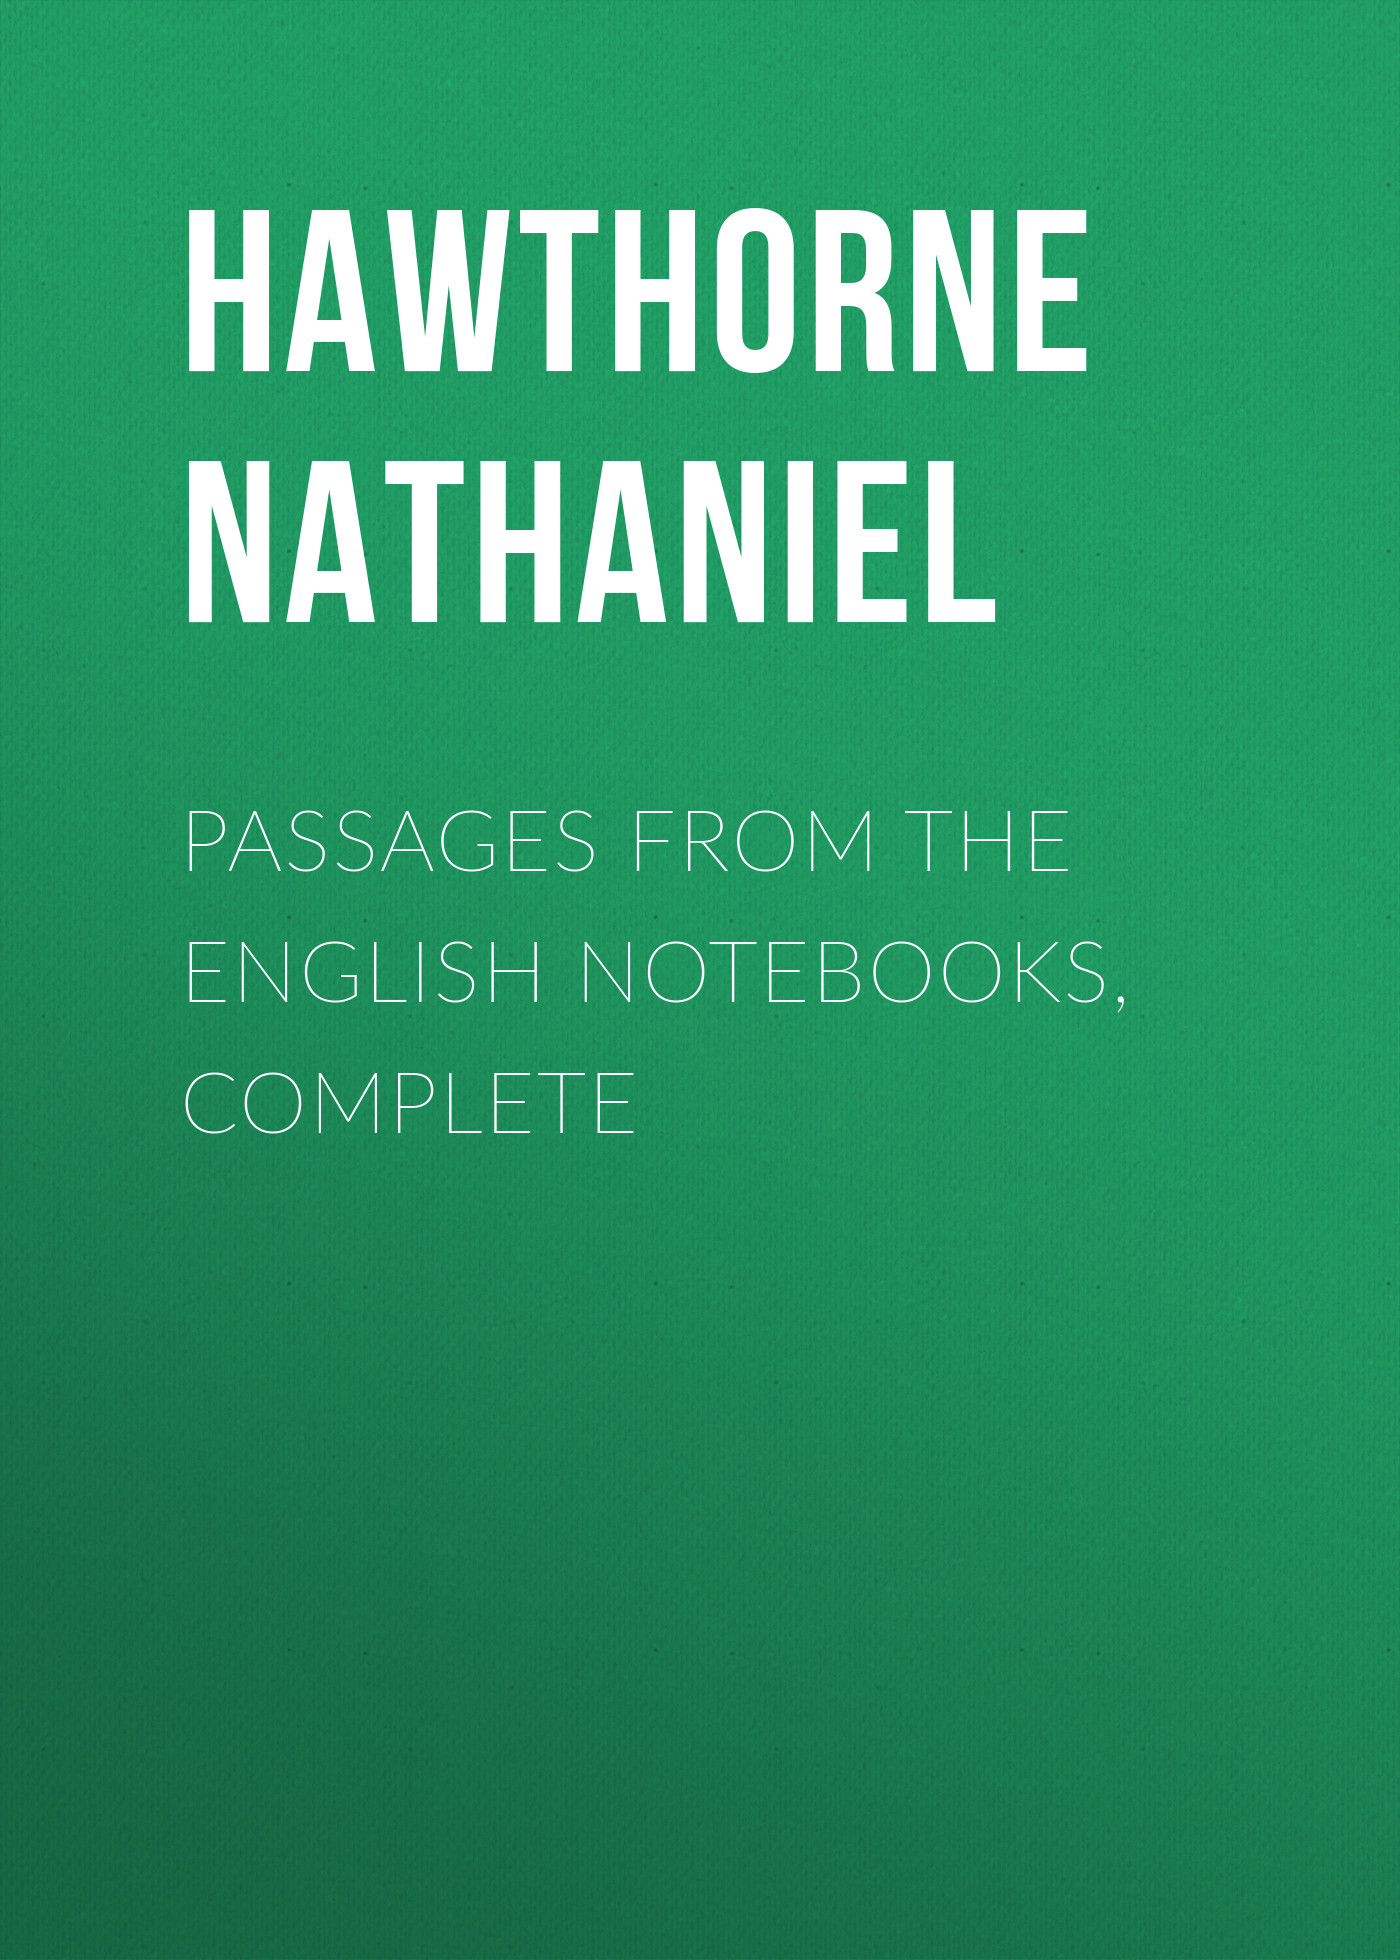 Passages from the English Notebooks, Complete